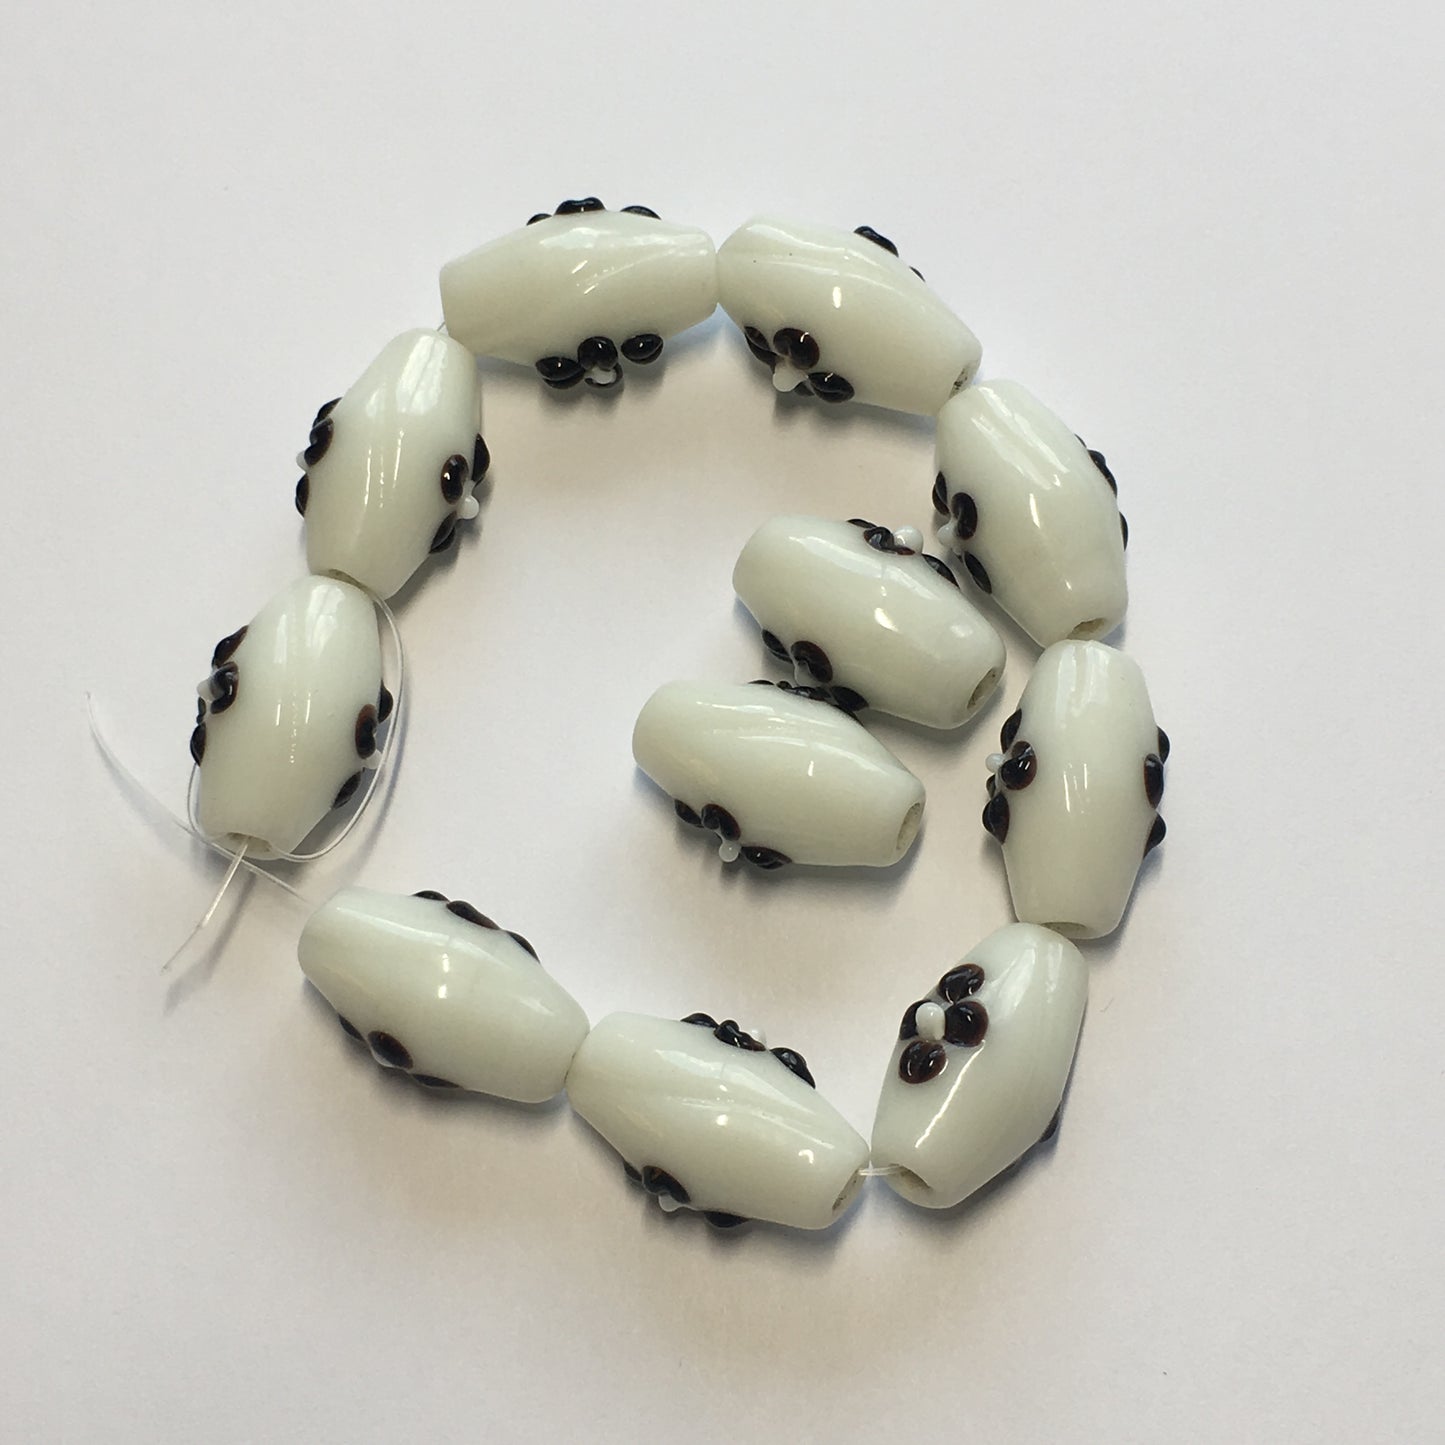 White Oval Lampwork Glass Beads with Brown/Black Flowers, 20 x 10 mm - 11 or 12 Beads